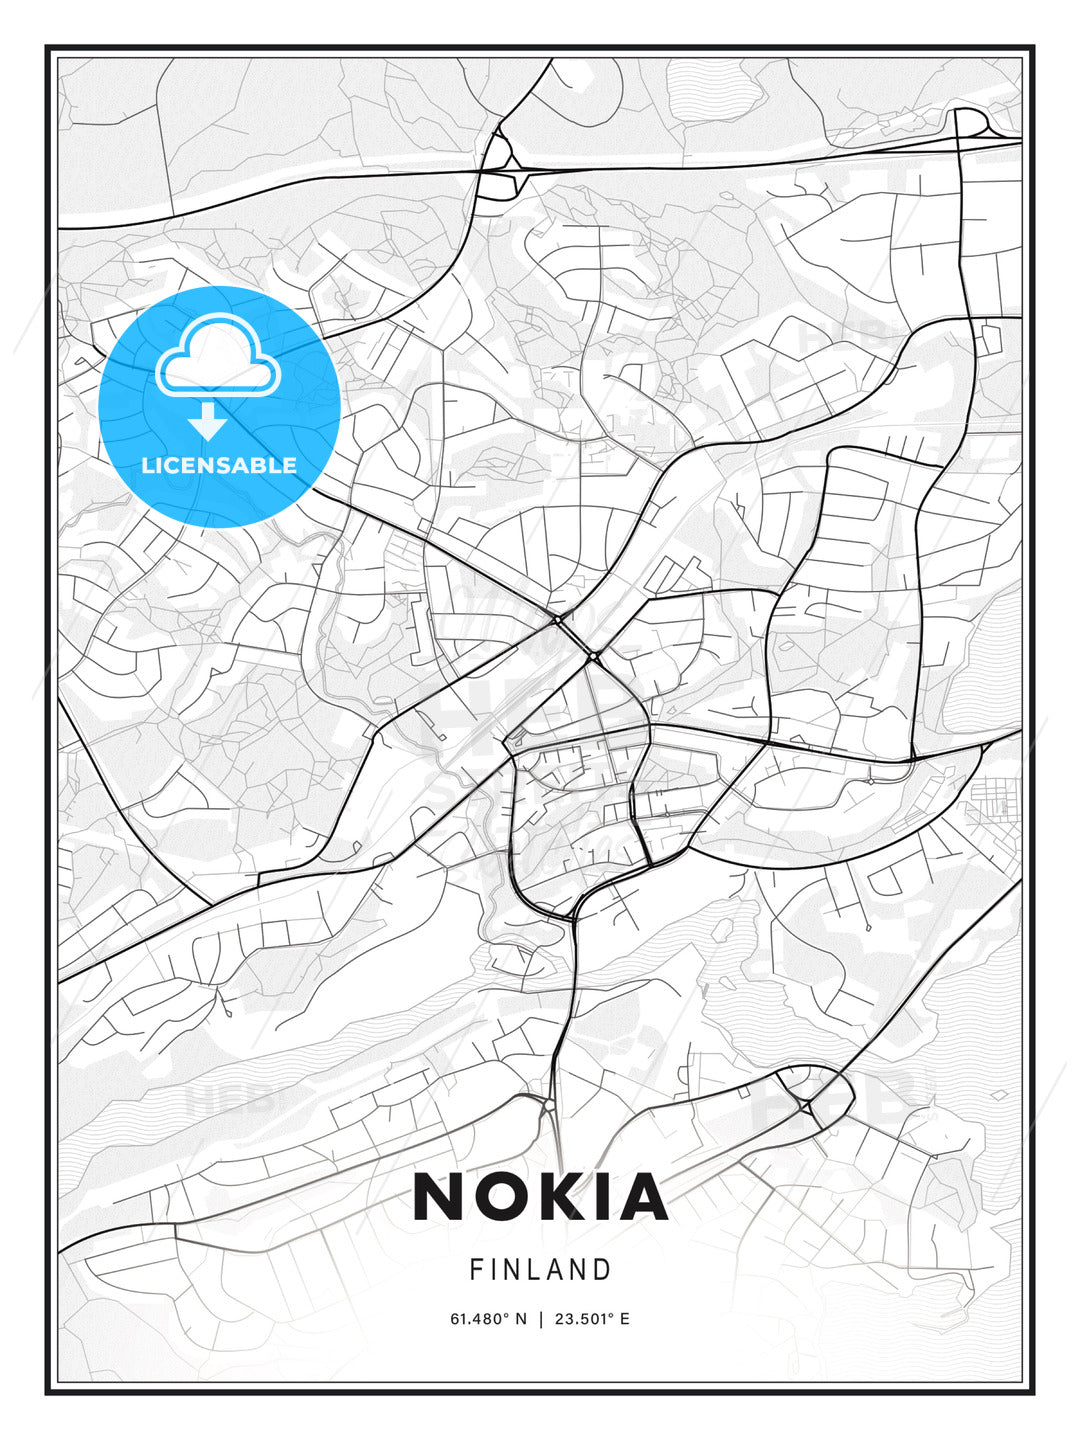 Nokia, Finland, Modern Print Template in Various Formats - HEBSTREITS Sketches